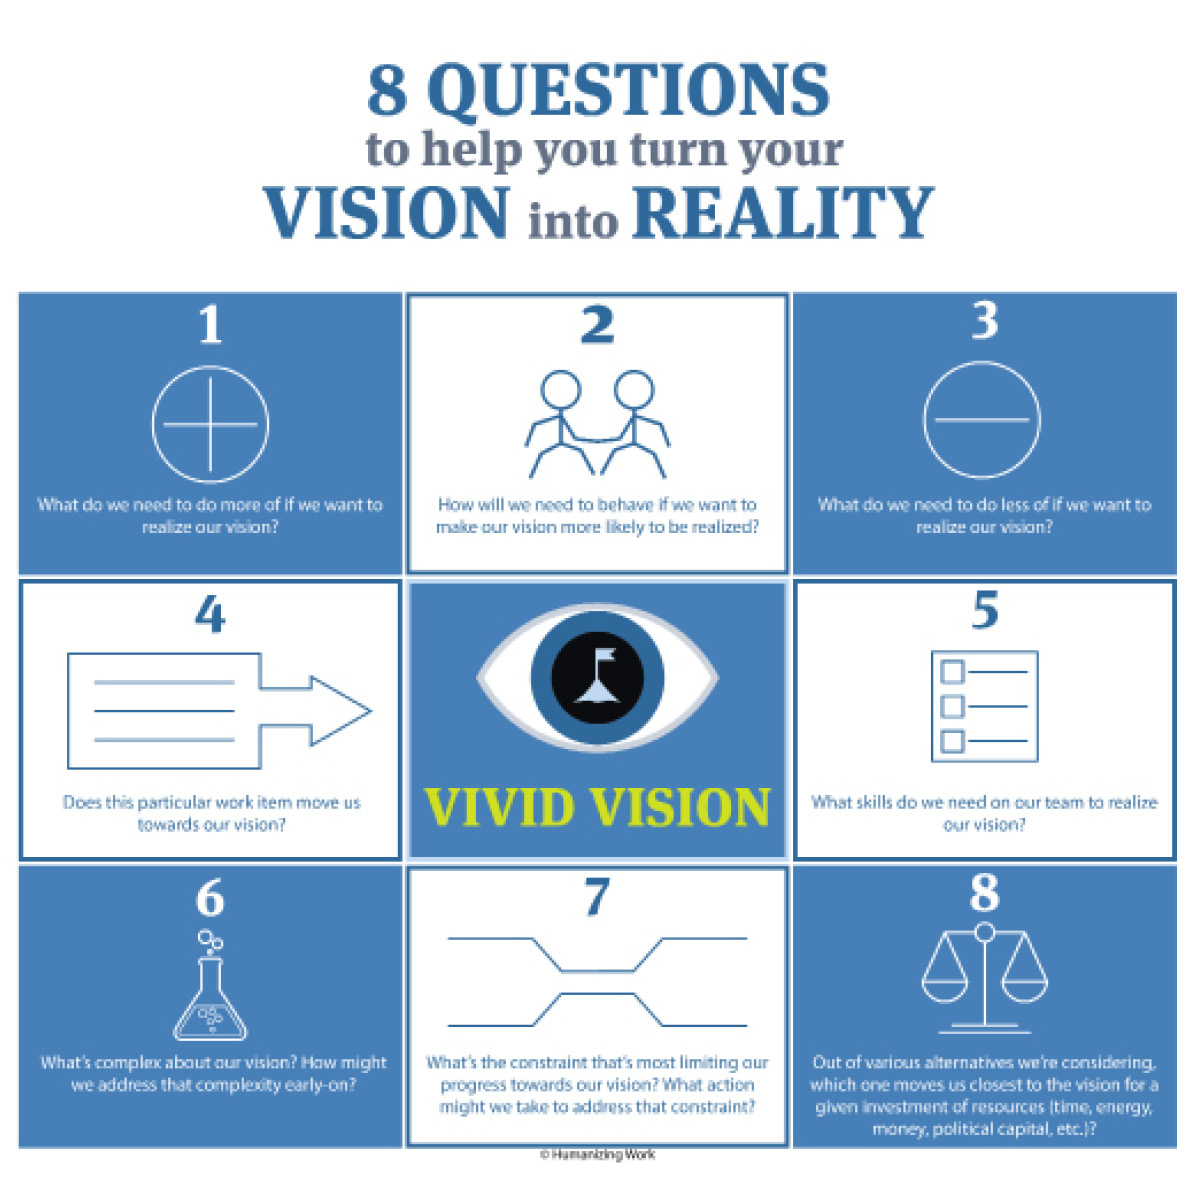 8 Questions towards Vision 